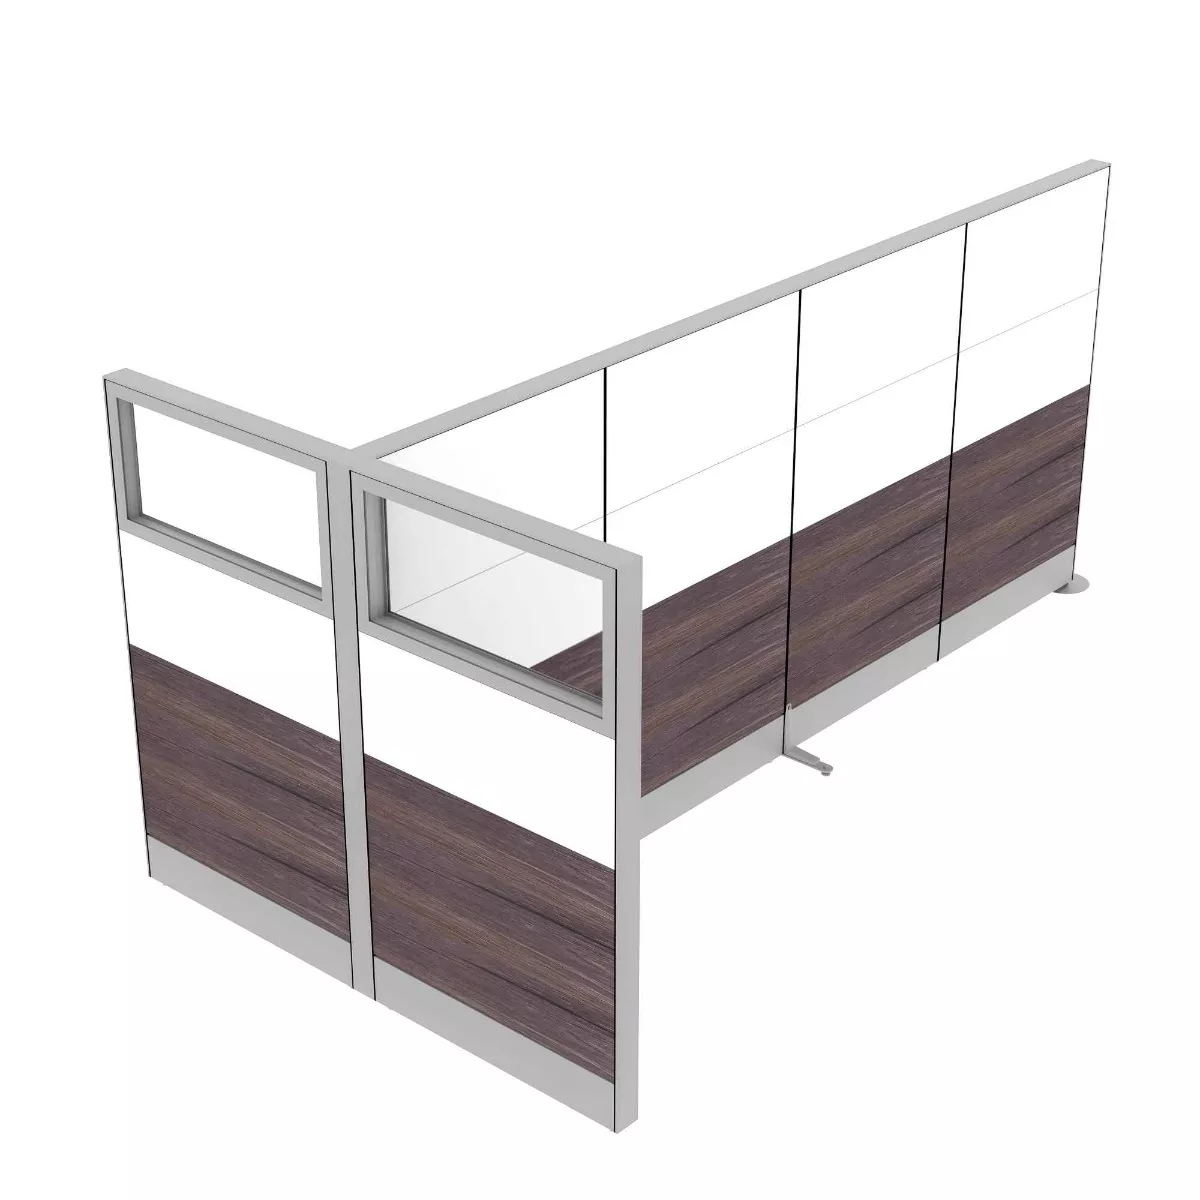 Render of 65" Tall Freestanding T-Shaped Office Room Divider Partition